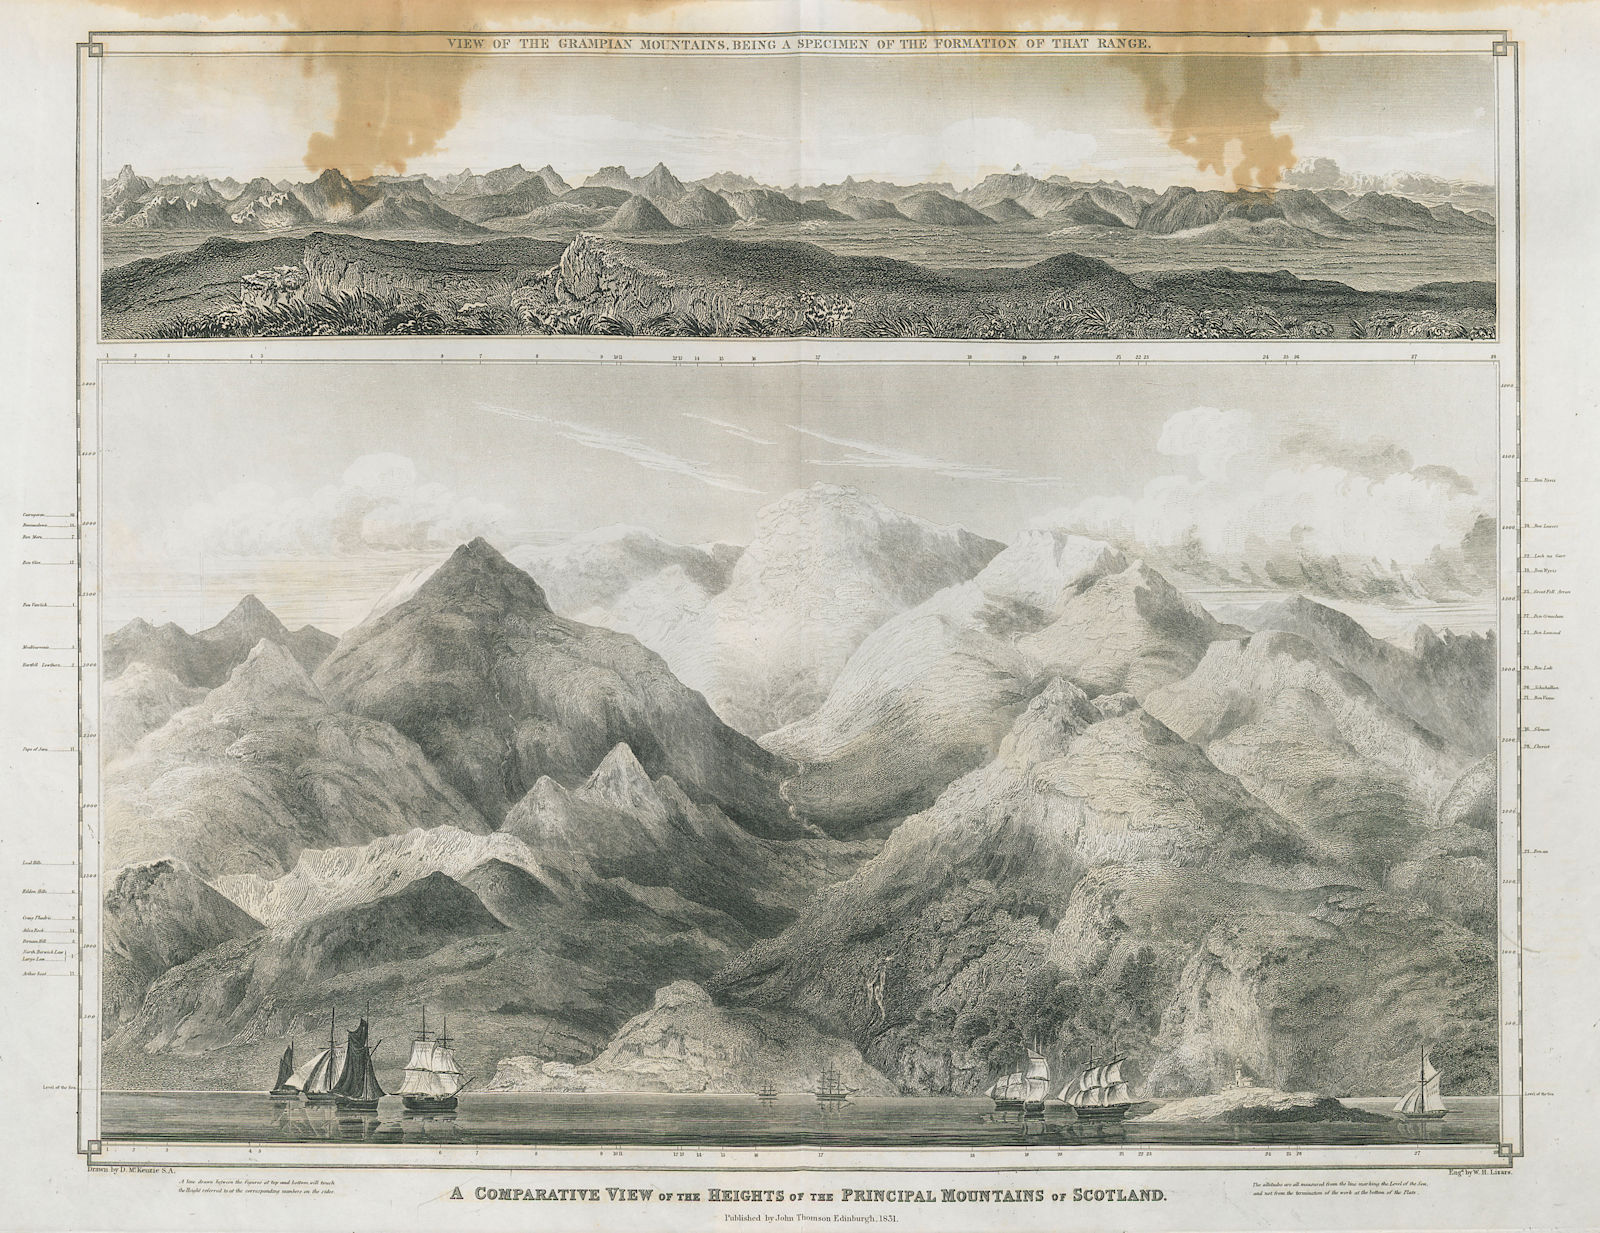 Associate Product Principal mountains of Scotland comparative. View of Grampians. THOMSON 1832 map